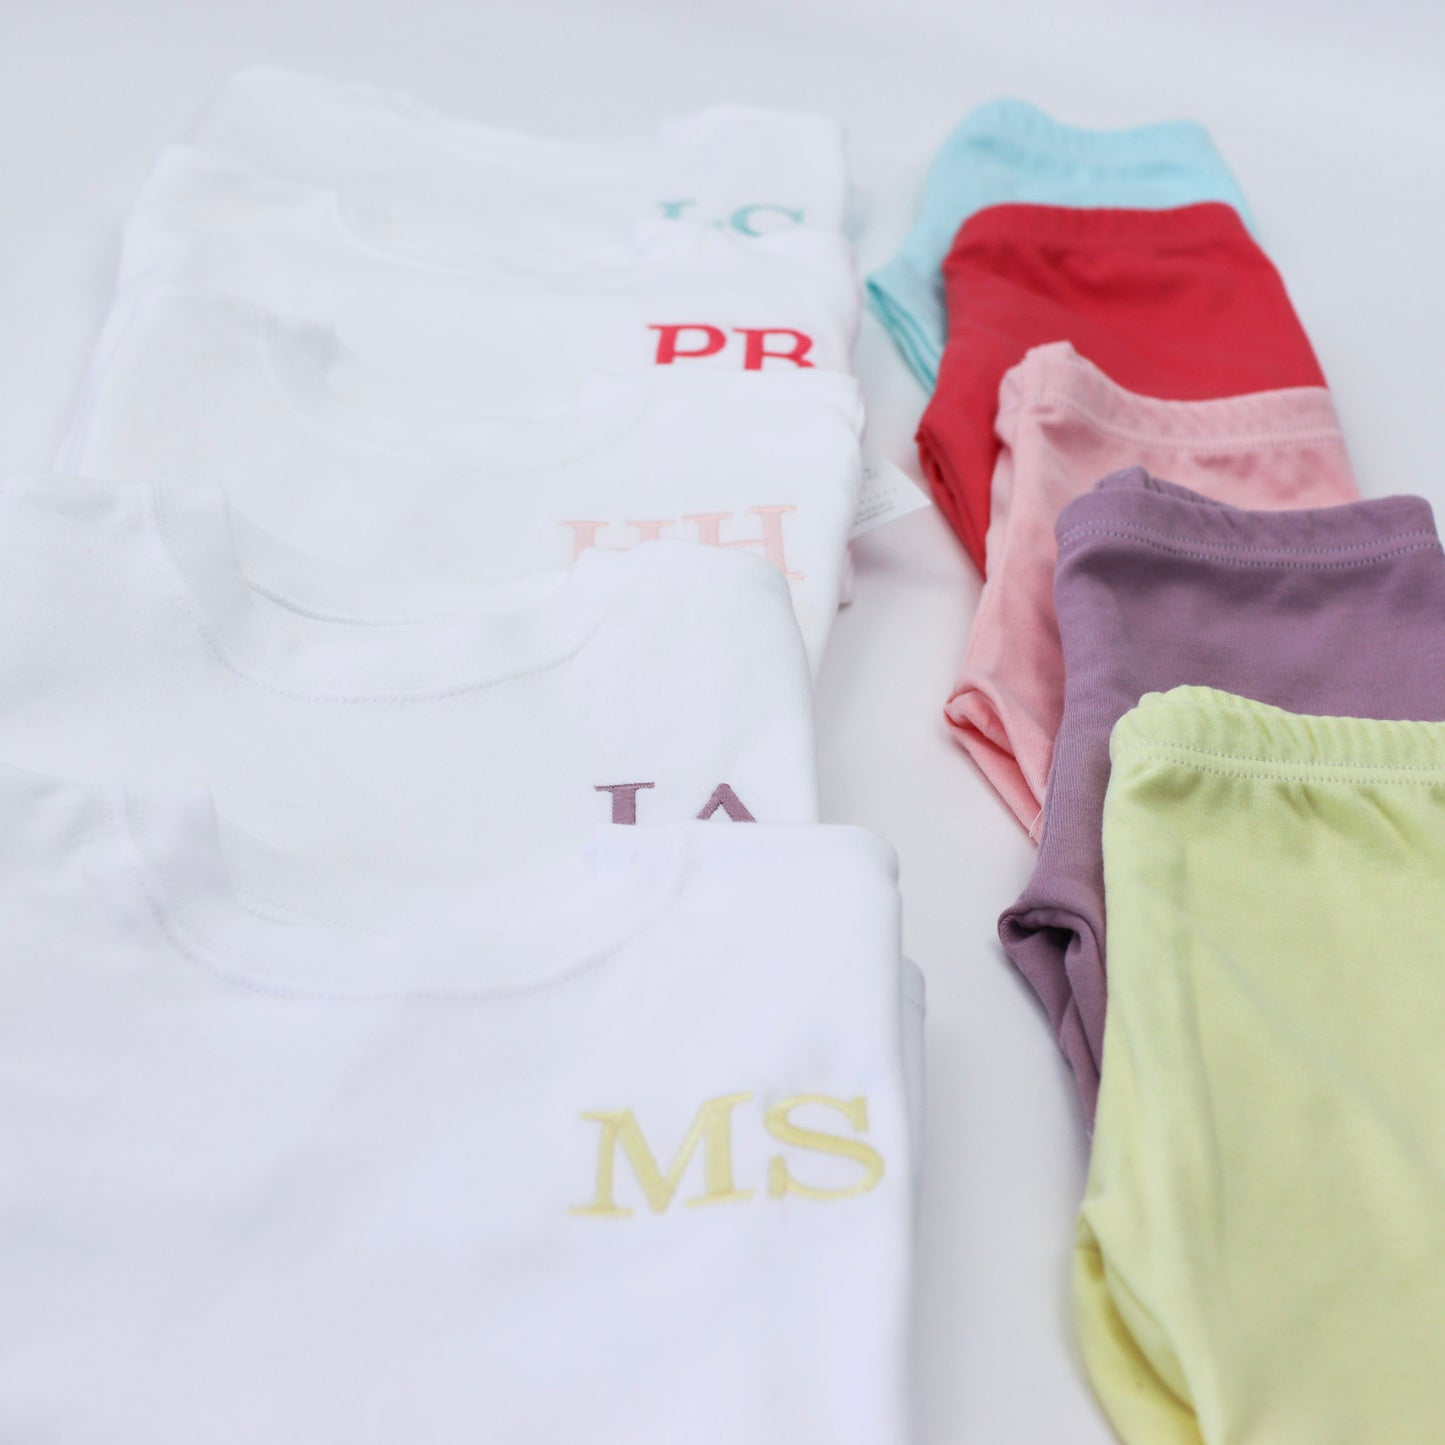 All Colours Embroidered T-Shirt & Lounge Cycle Shorts Combo